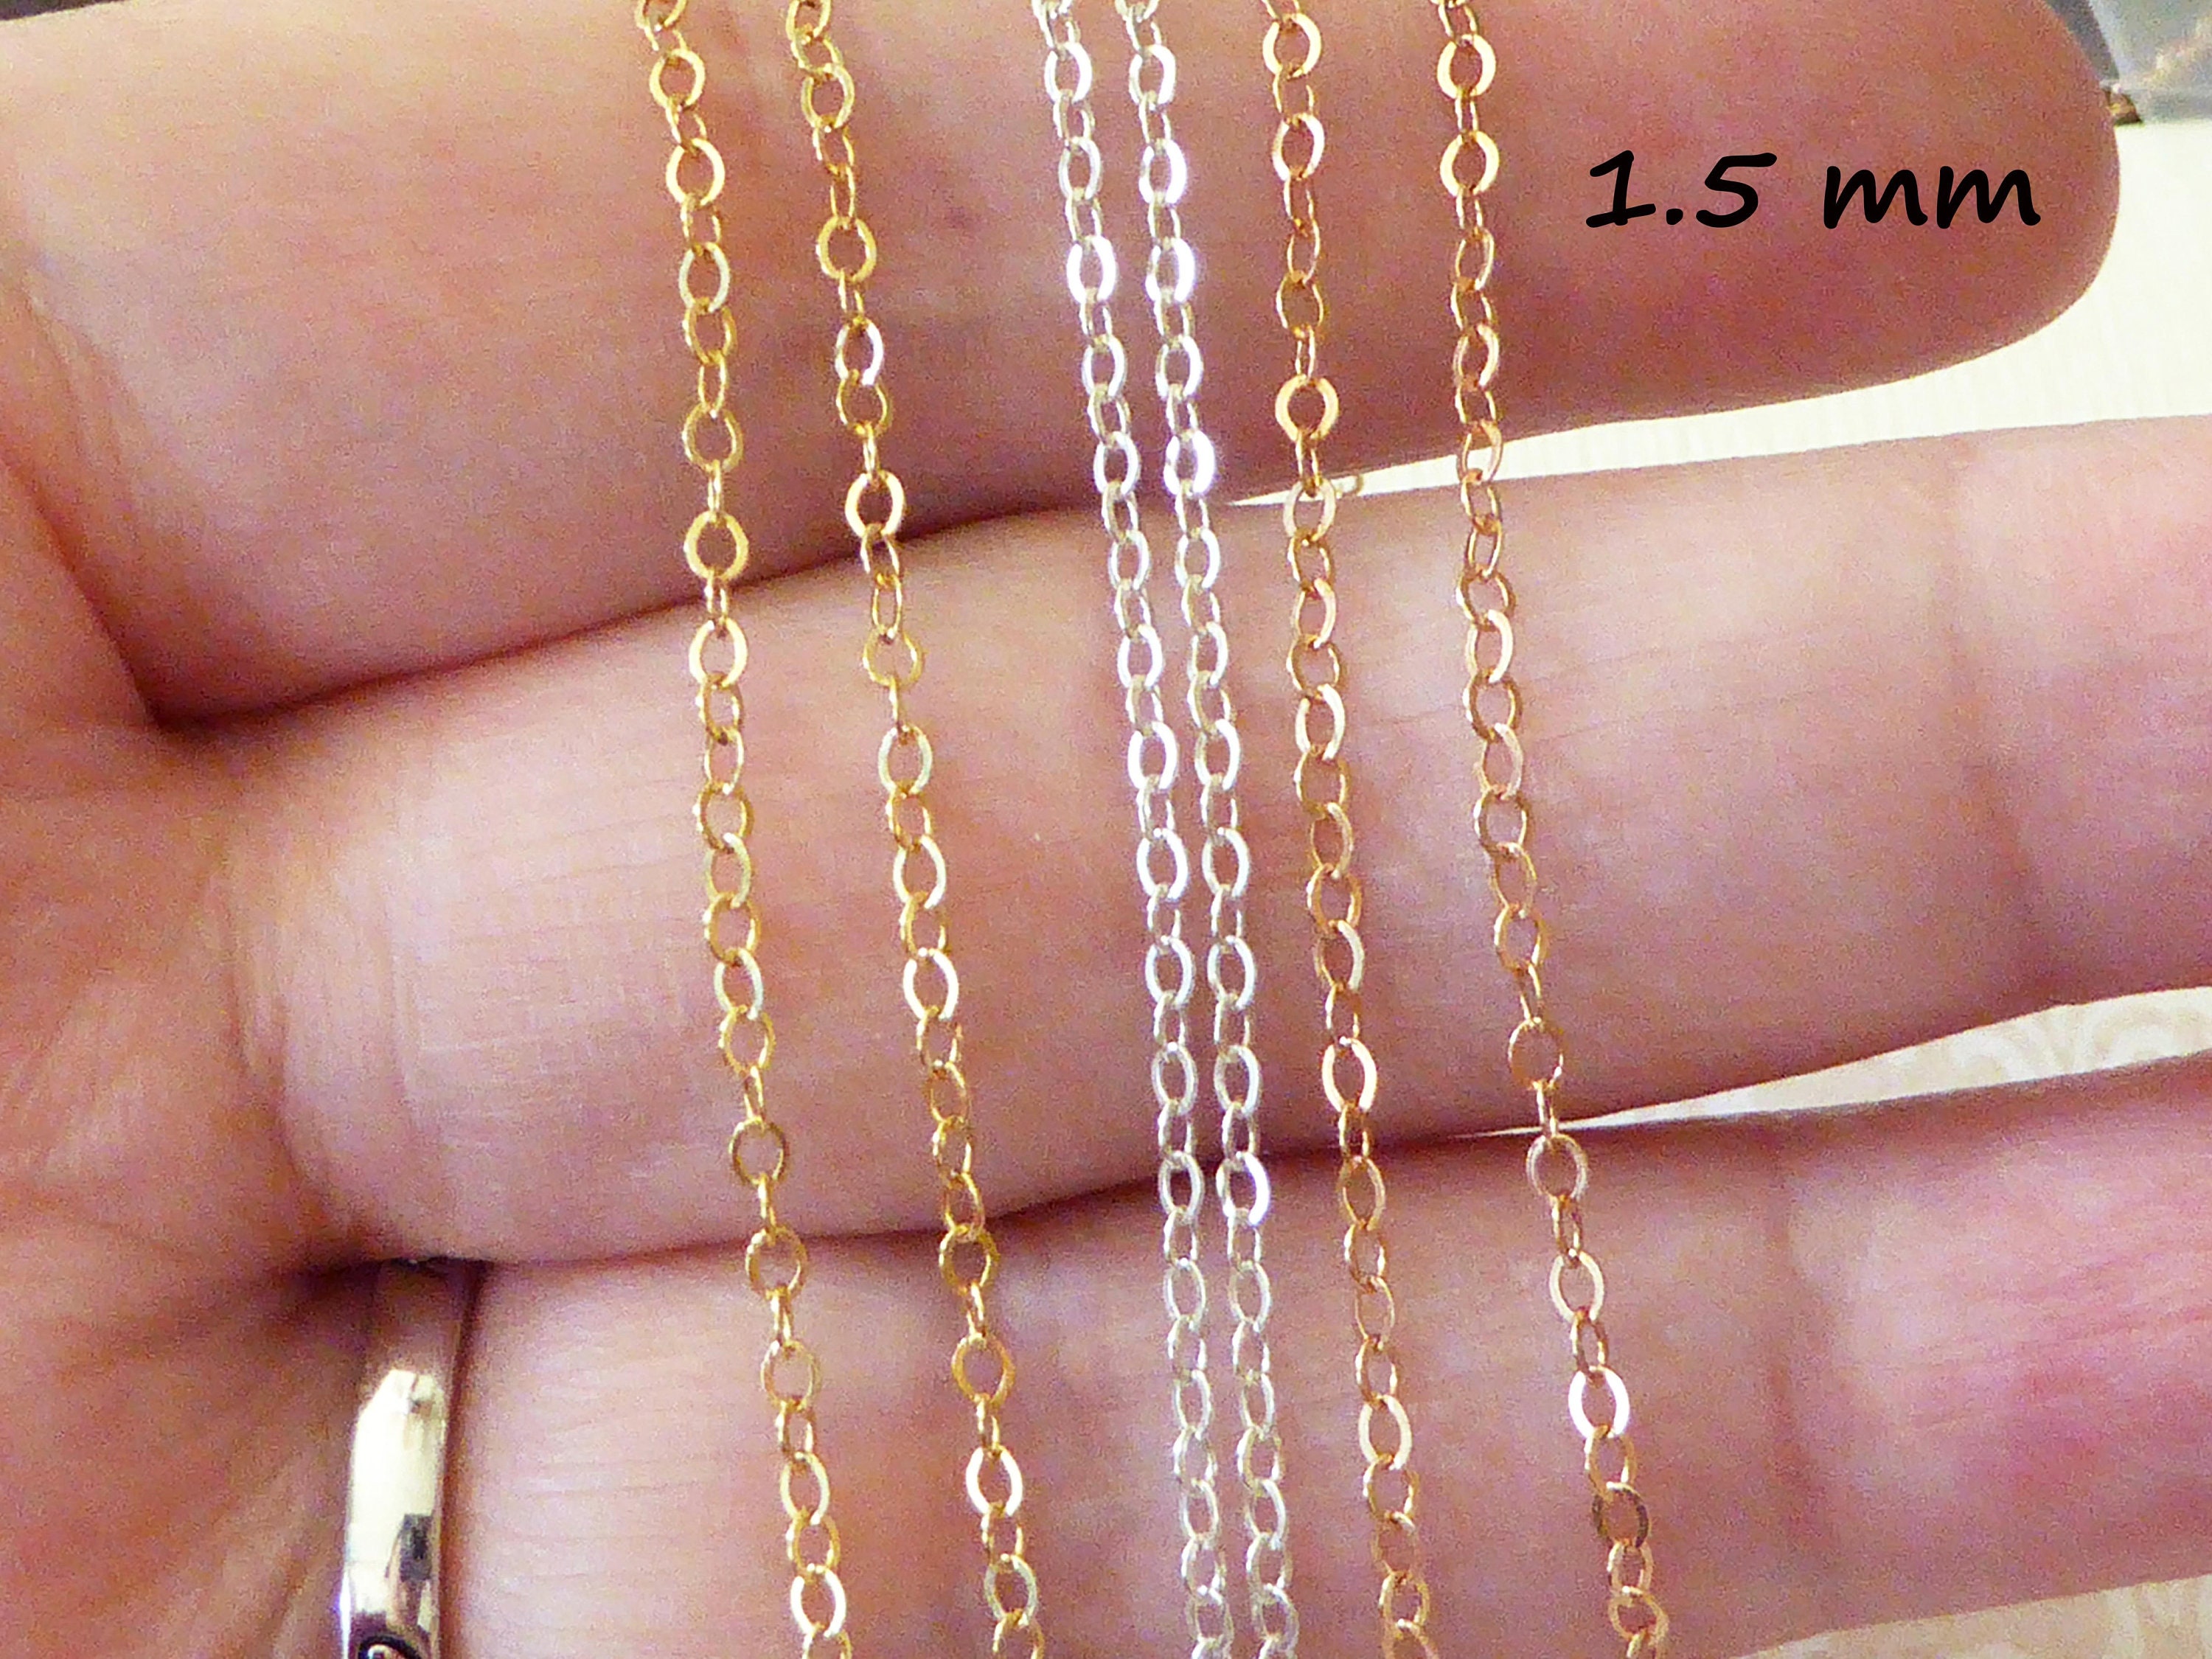 1FT 1.4x1.2mm 14k Gold Filled Chain by Foot, Cut to Size Cable